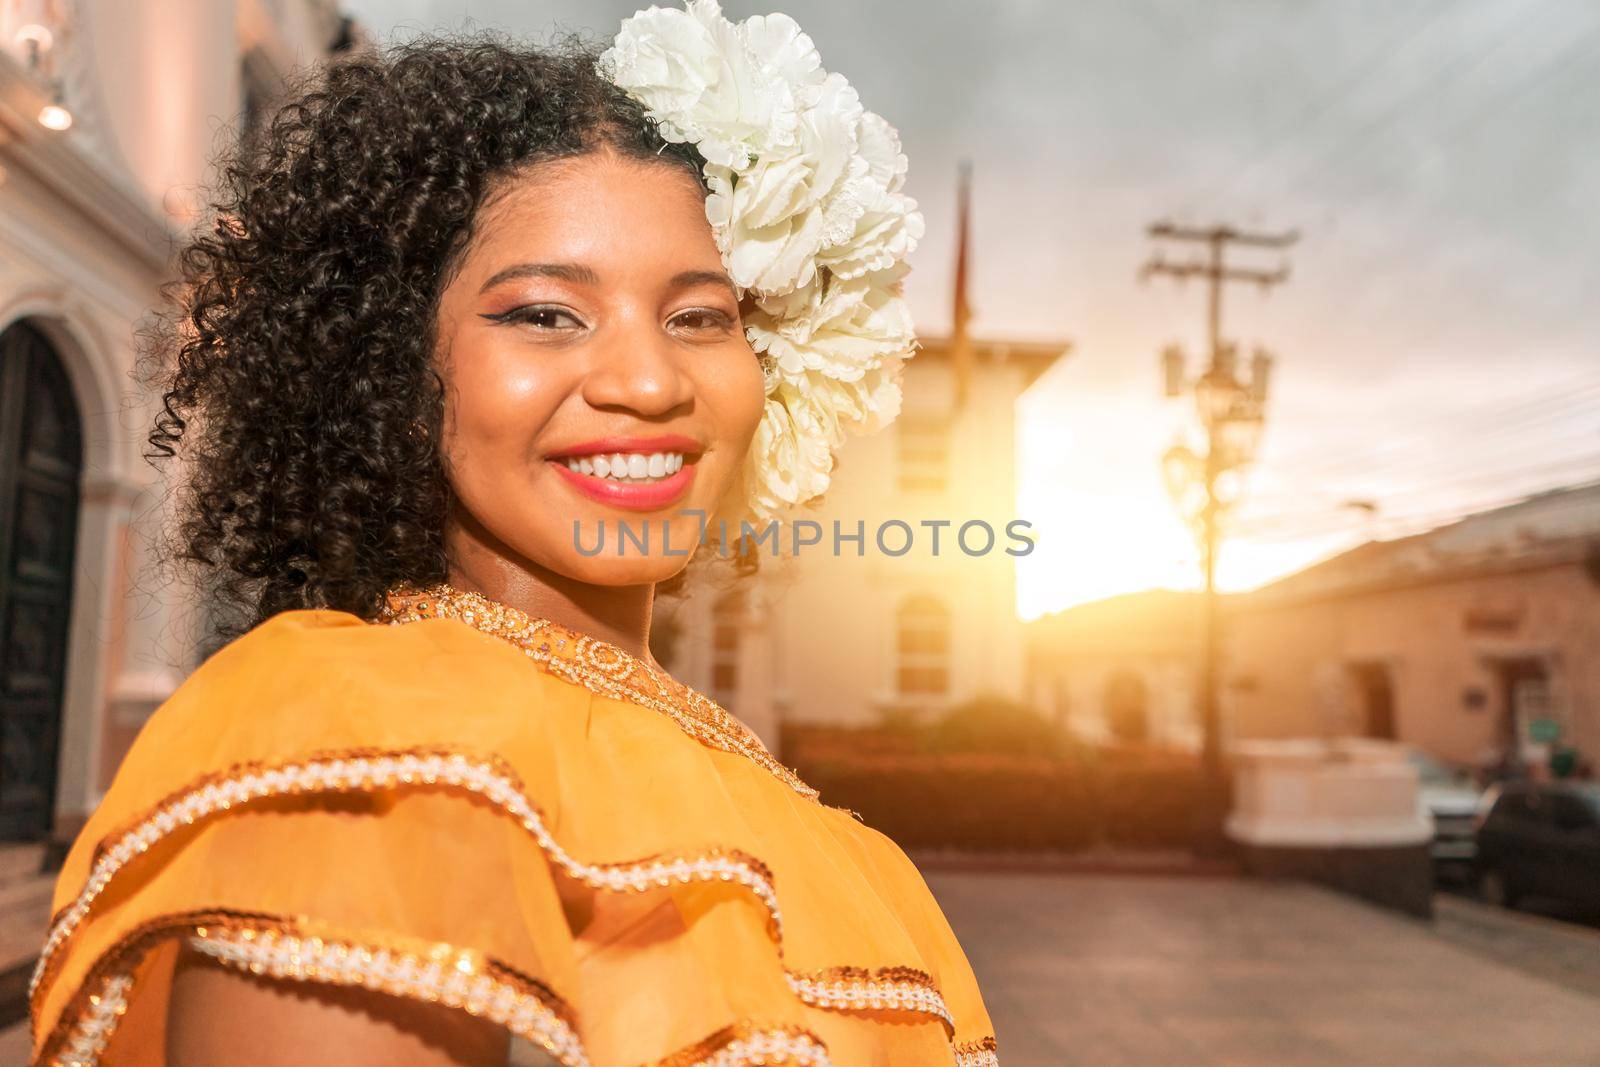 Mixed race teenager smiling wearing the classic Nicaraguan dress and flowers in her curly hair at sunset by cfalvarez